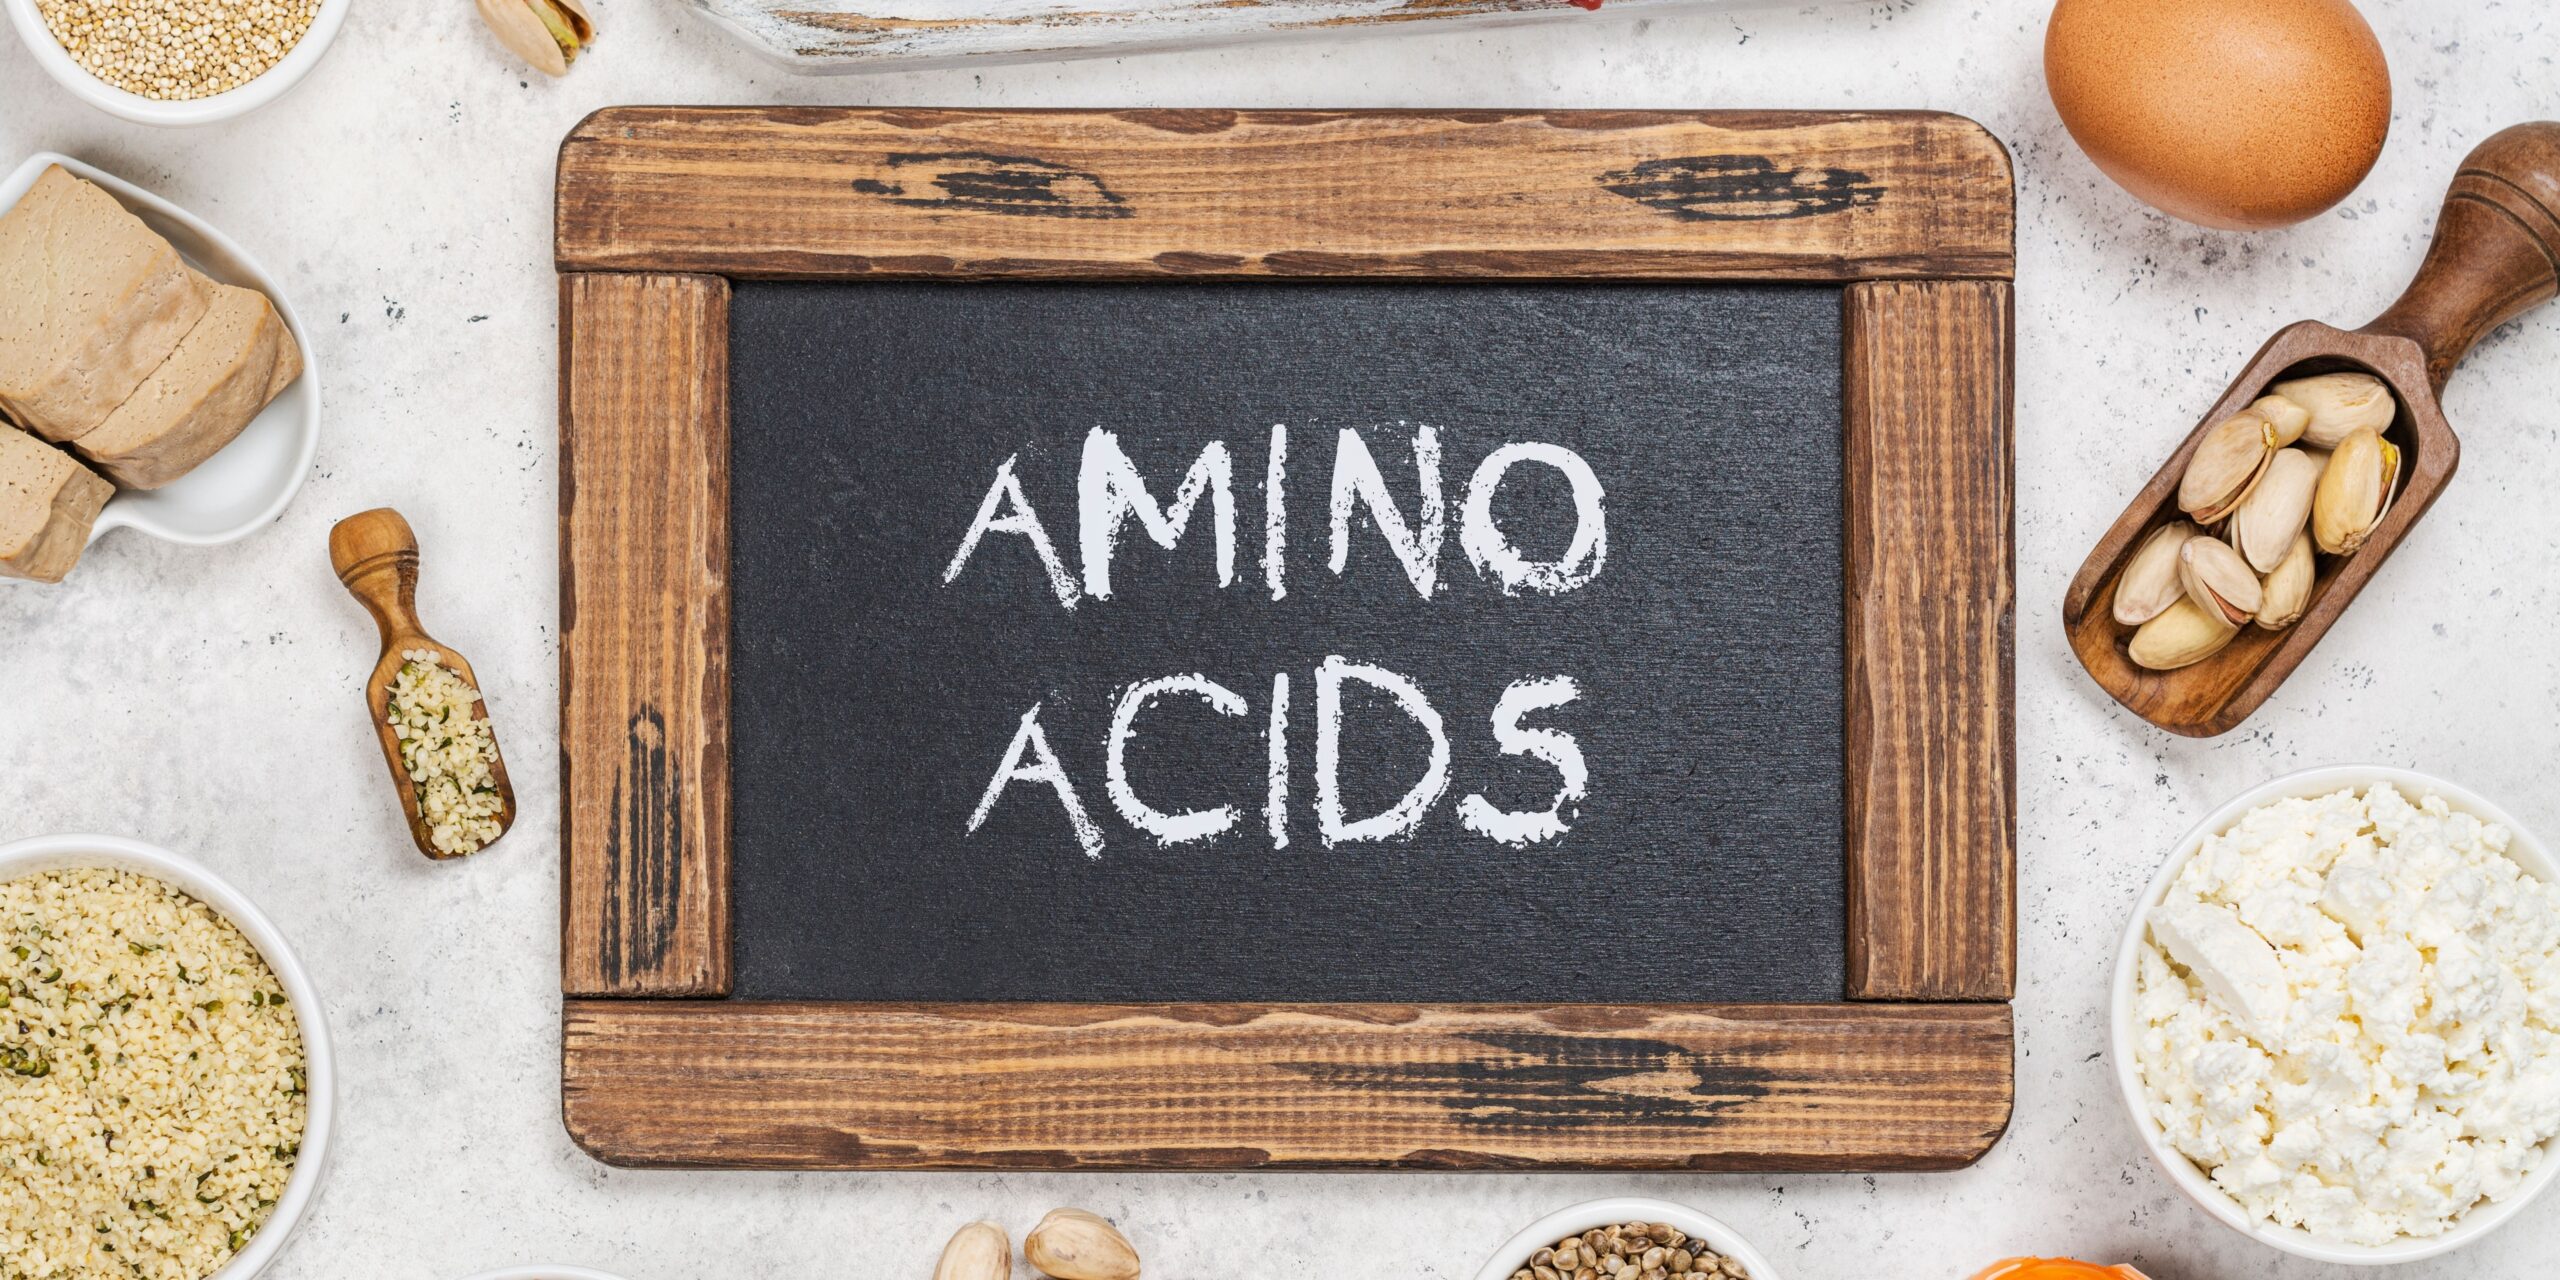 How can Amino Acids help you improve your health?